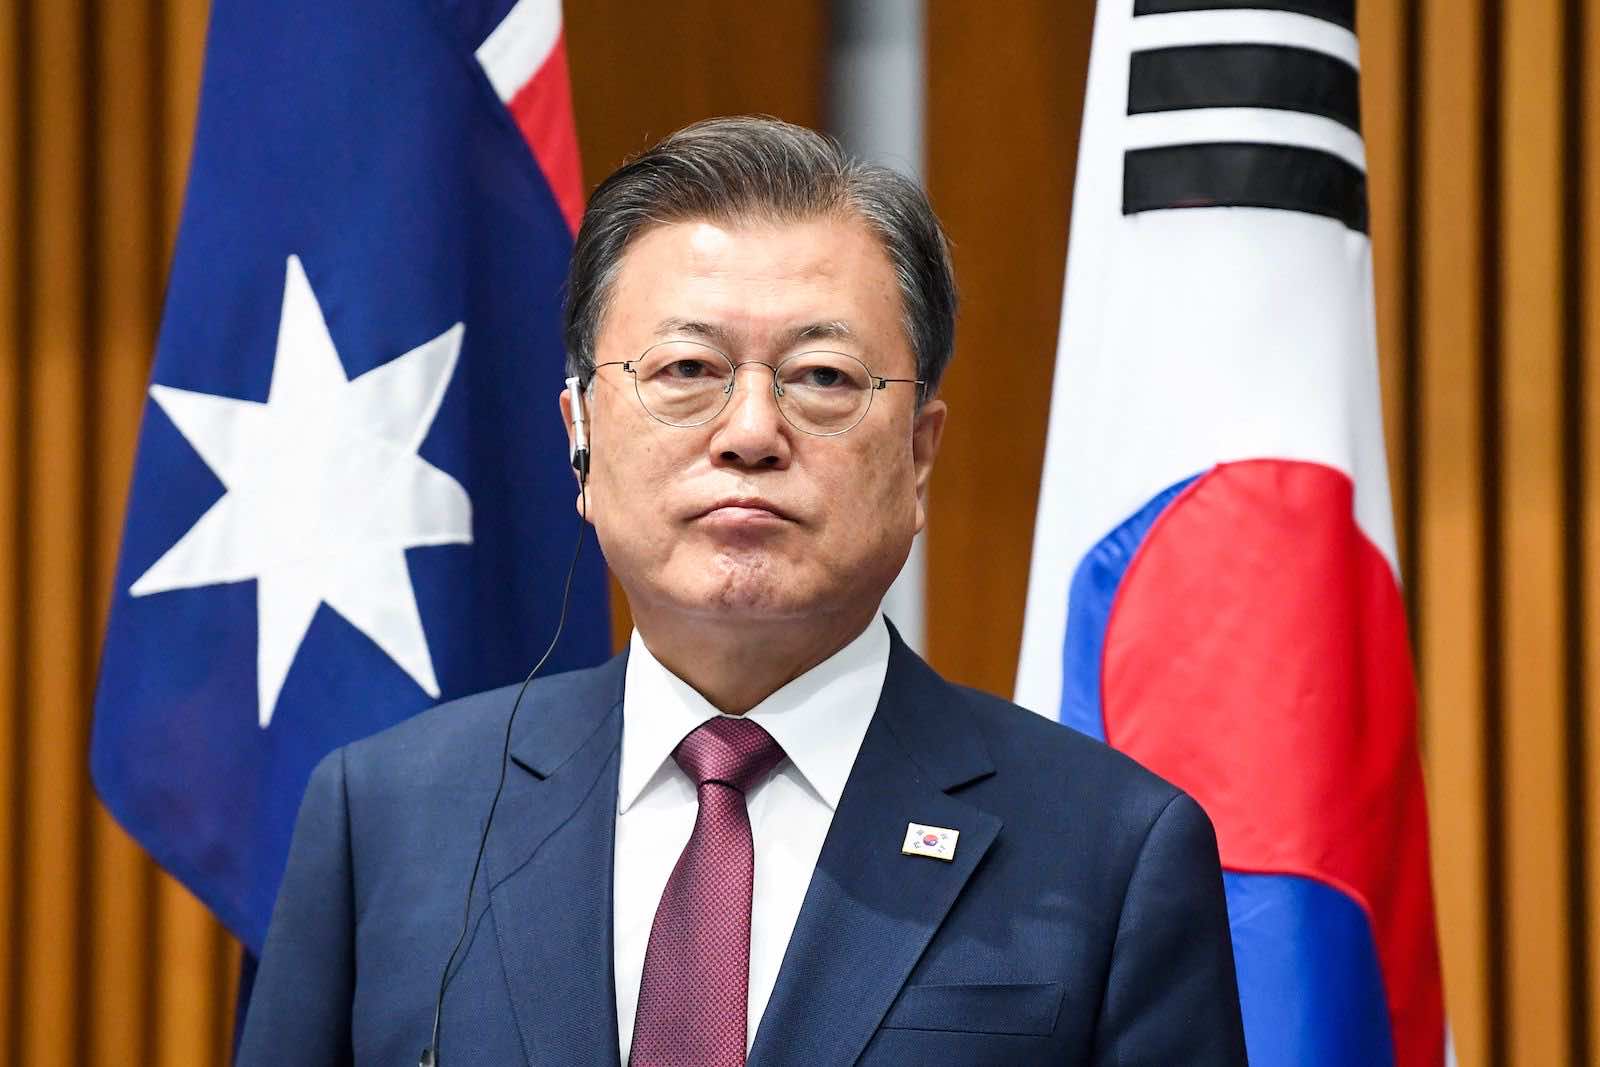 South Korean President Moon Jae-in visiting Canberra on 13 December (Lukas Coch via Getty Images)